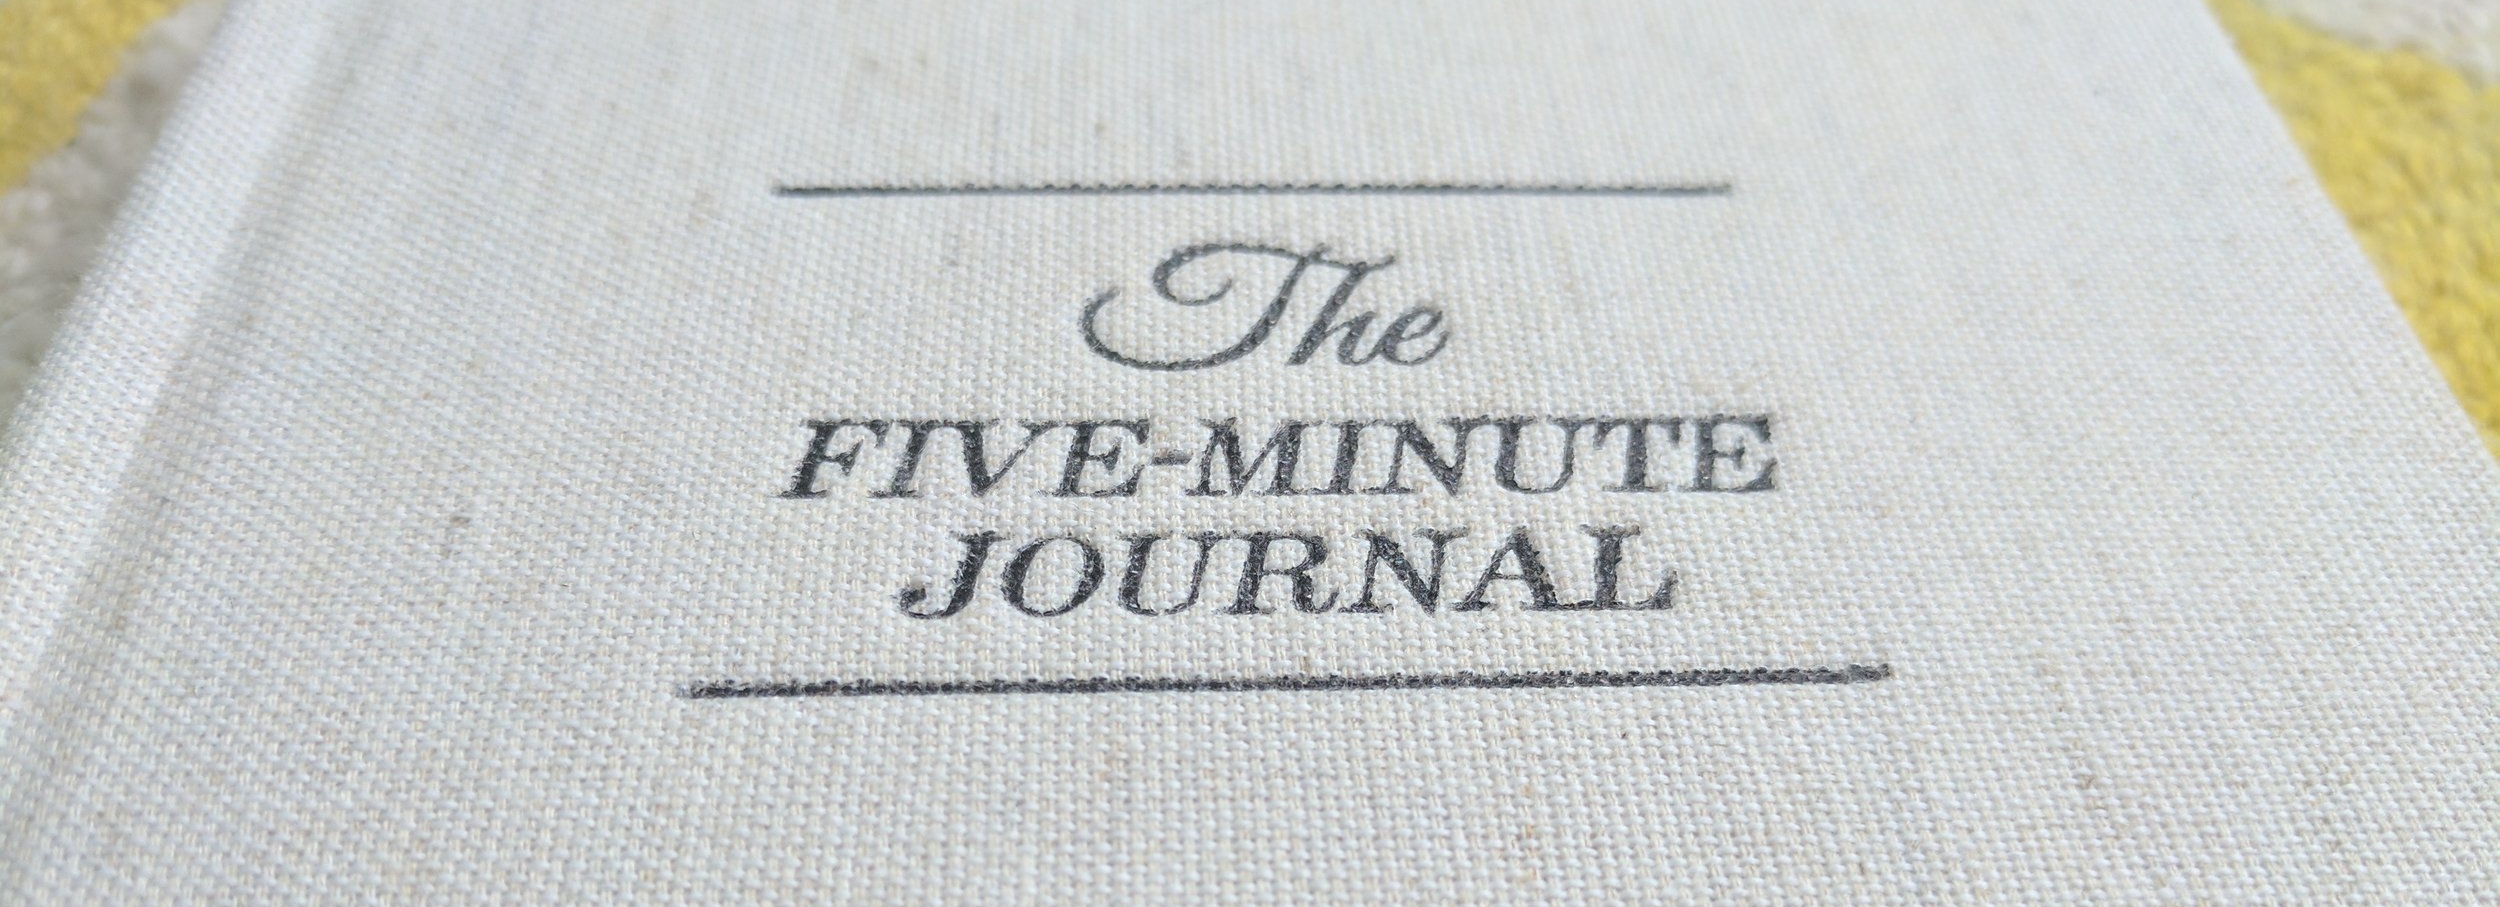 Our Editor's Honest Review of The Five-Minute Journal